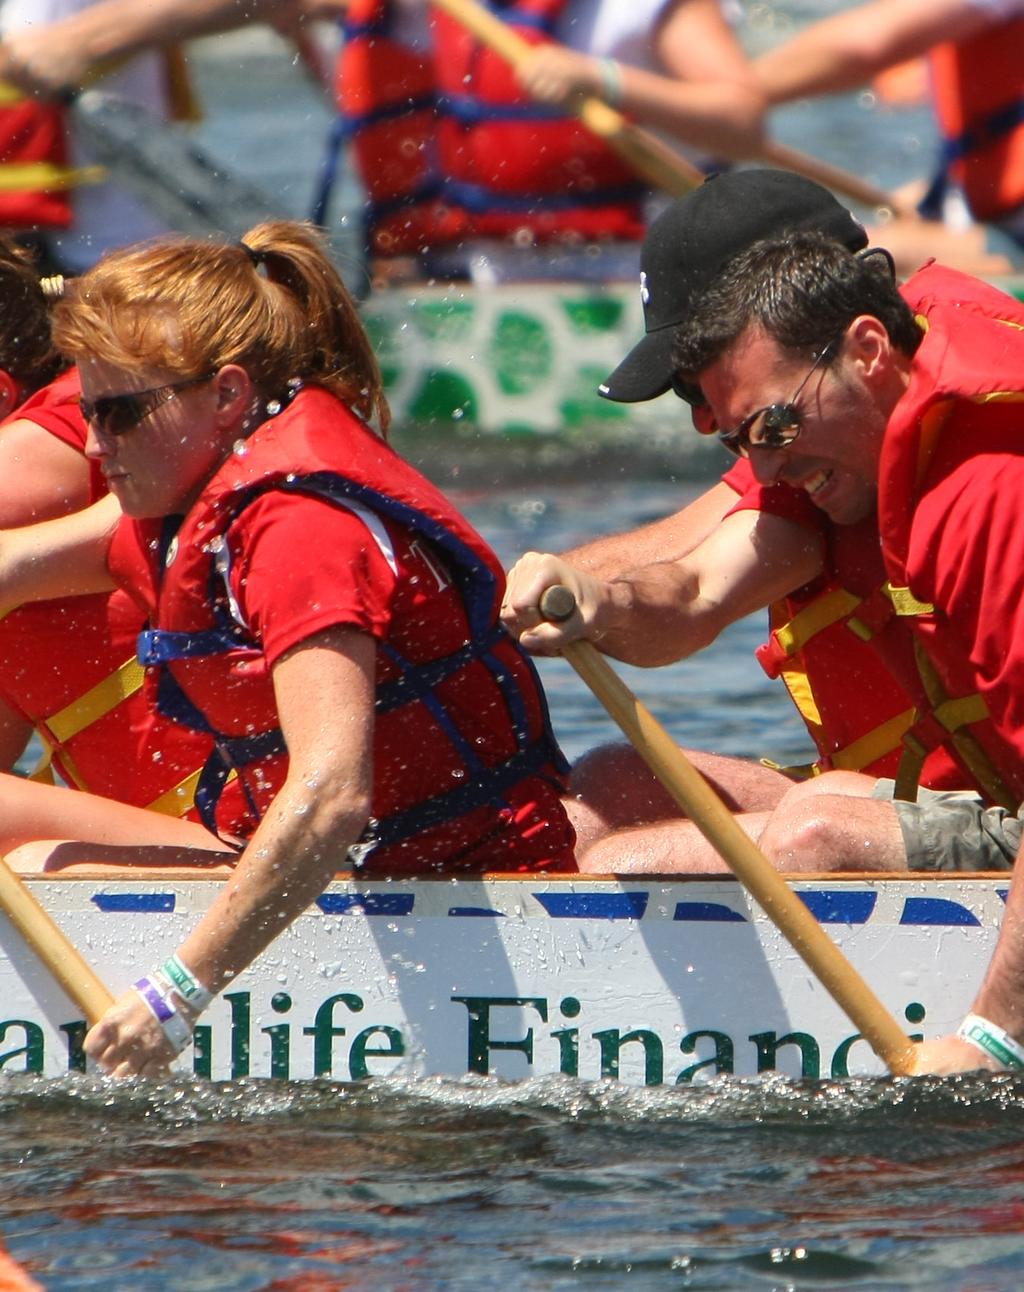 The Event Manulife Dragon Boat Festival The Manulife Dragon Boat Festival is dedicated to promoting healthy communities through physical activity is supporting the Nova Scotia Amateur Sport Fund.